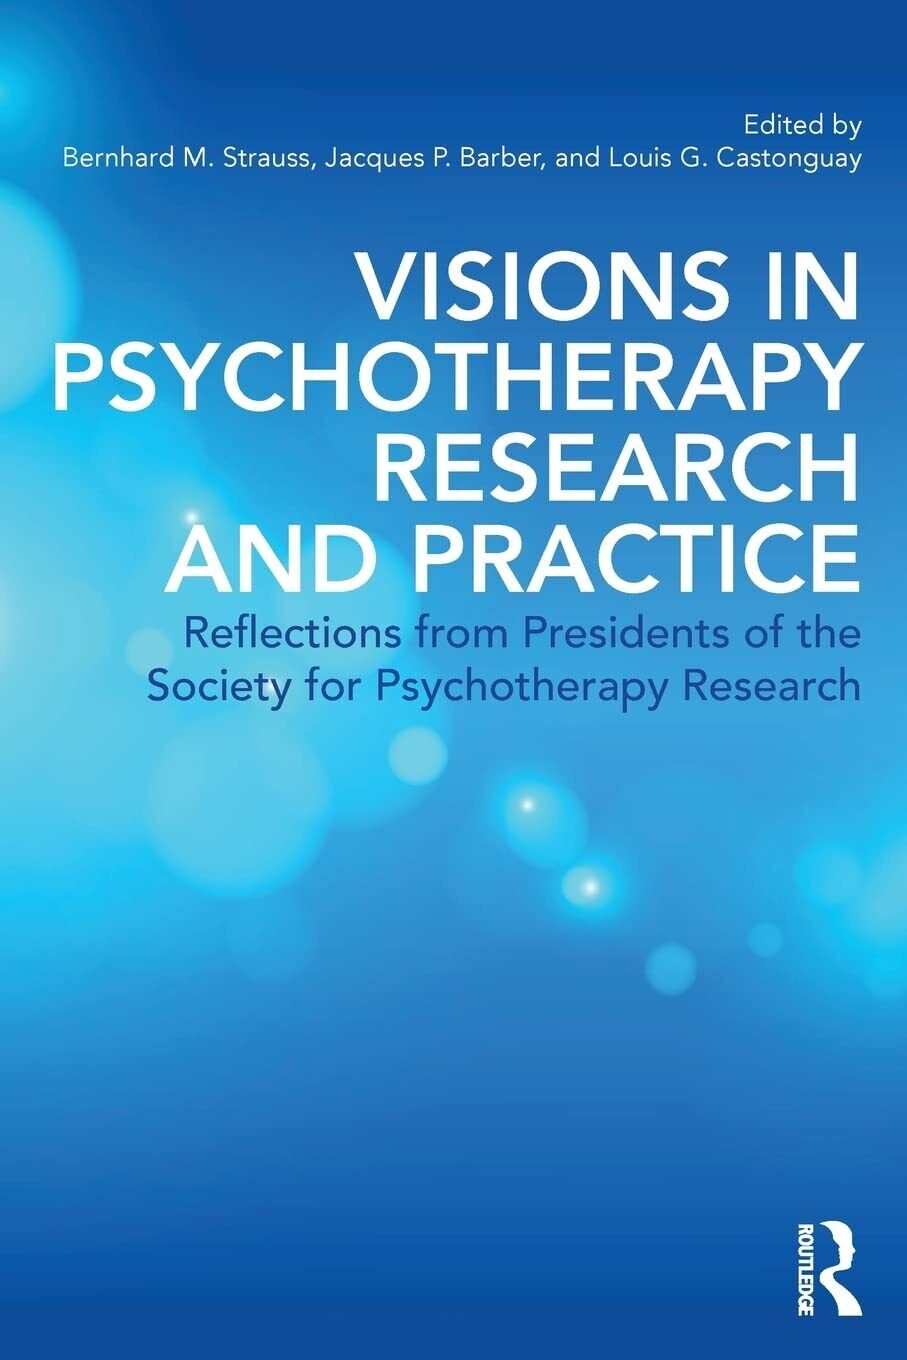 Visions in Psychotherapy Research and Practice - Bernhard M. Strauss - 2015 libro usato